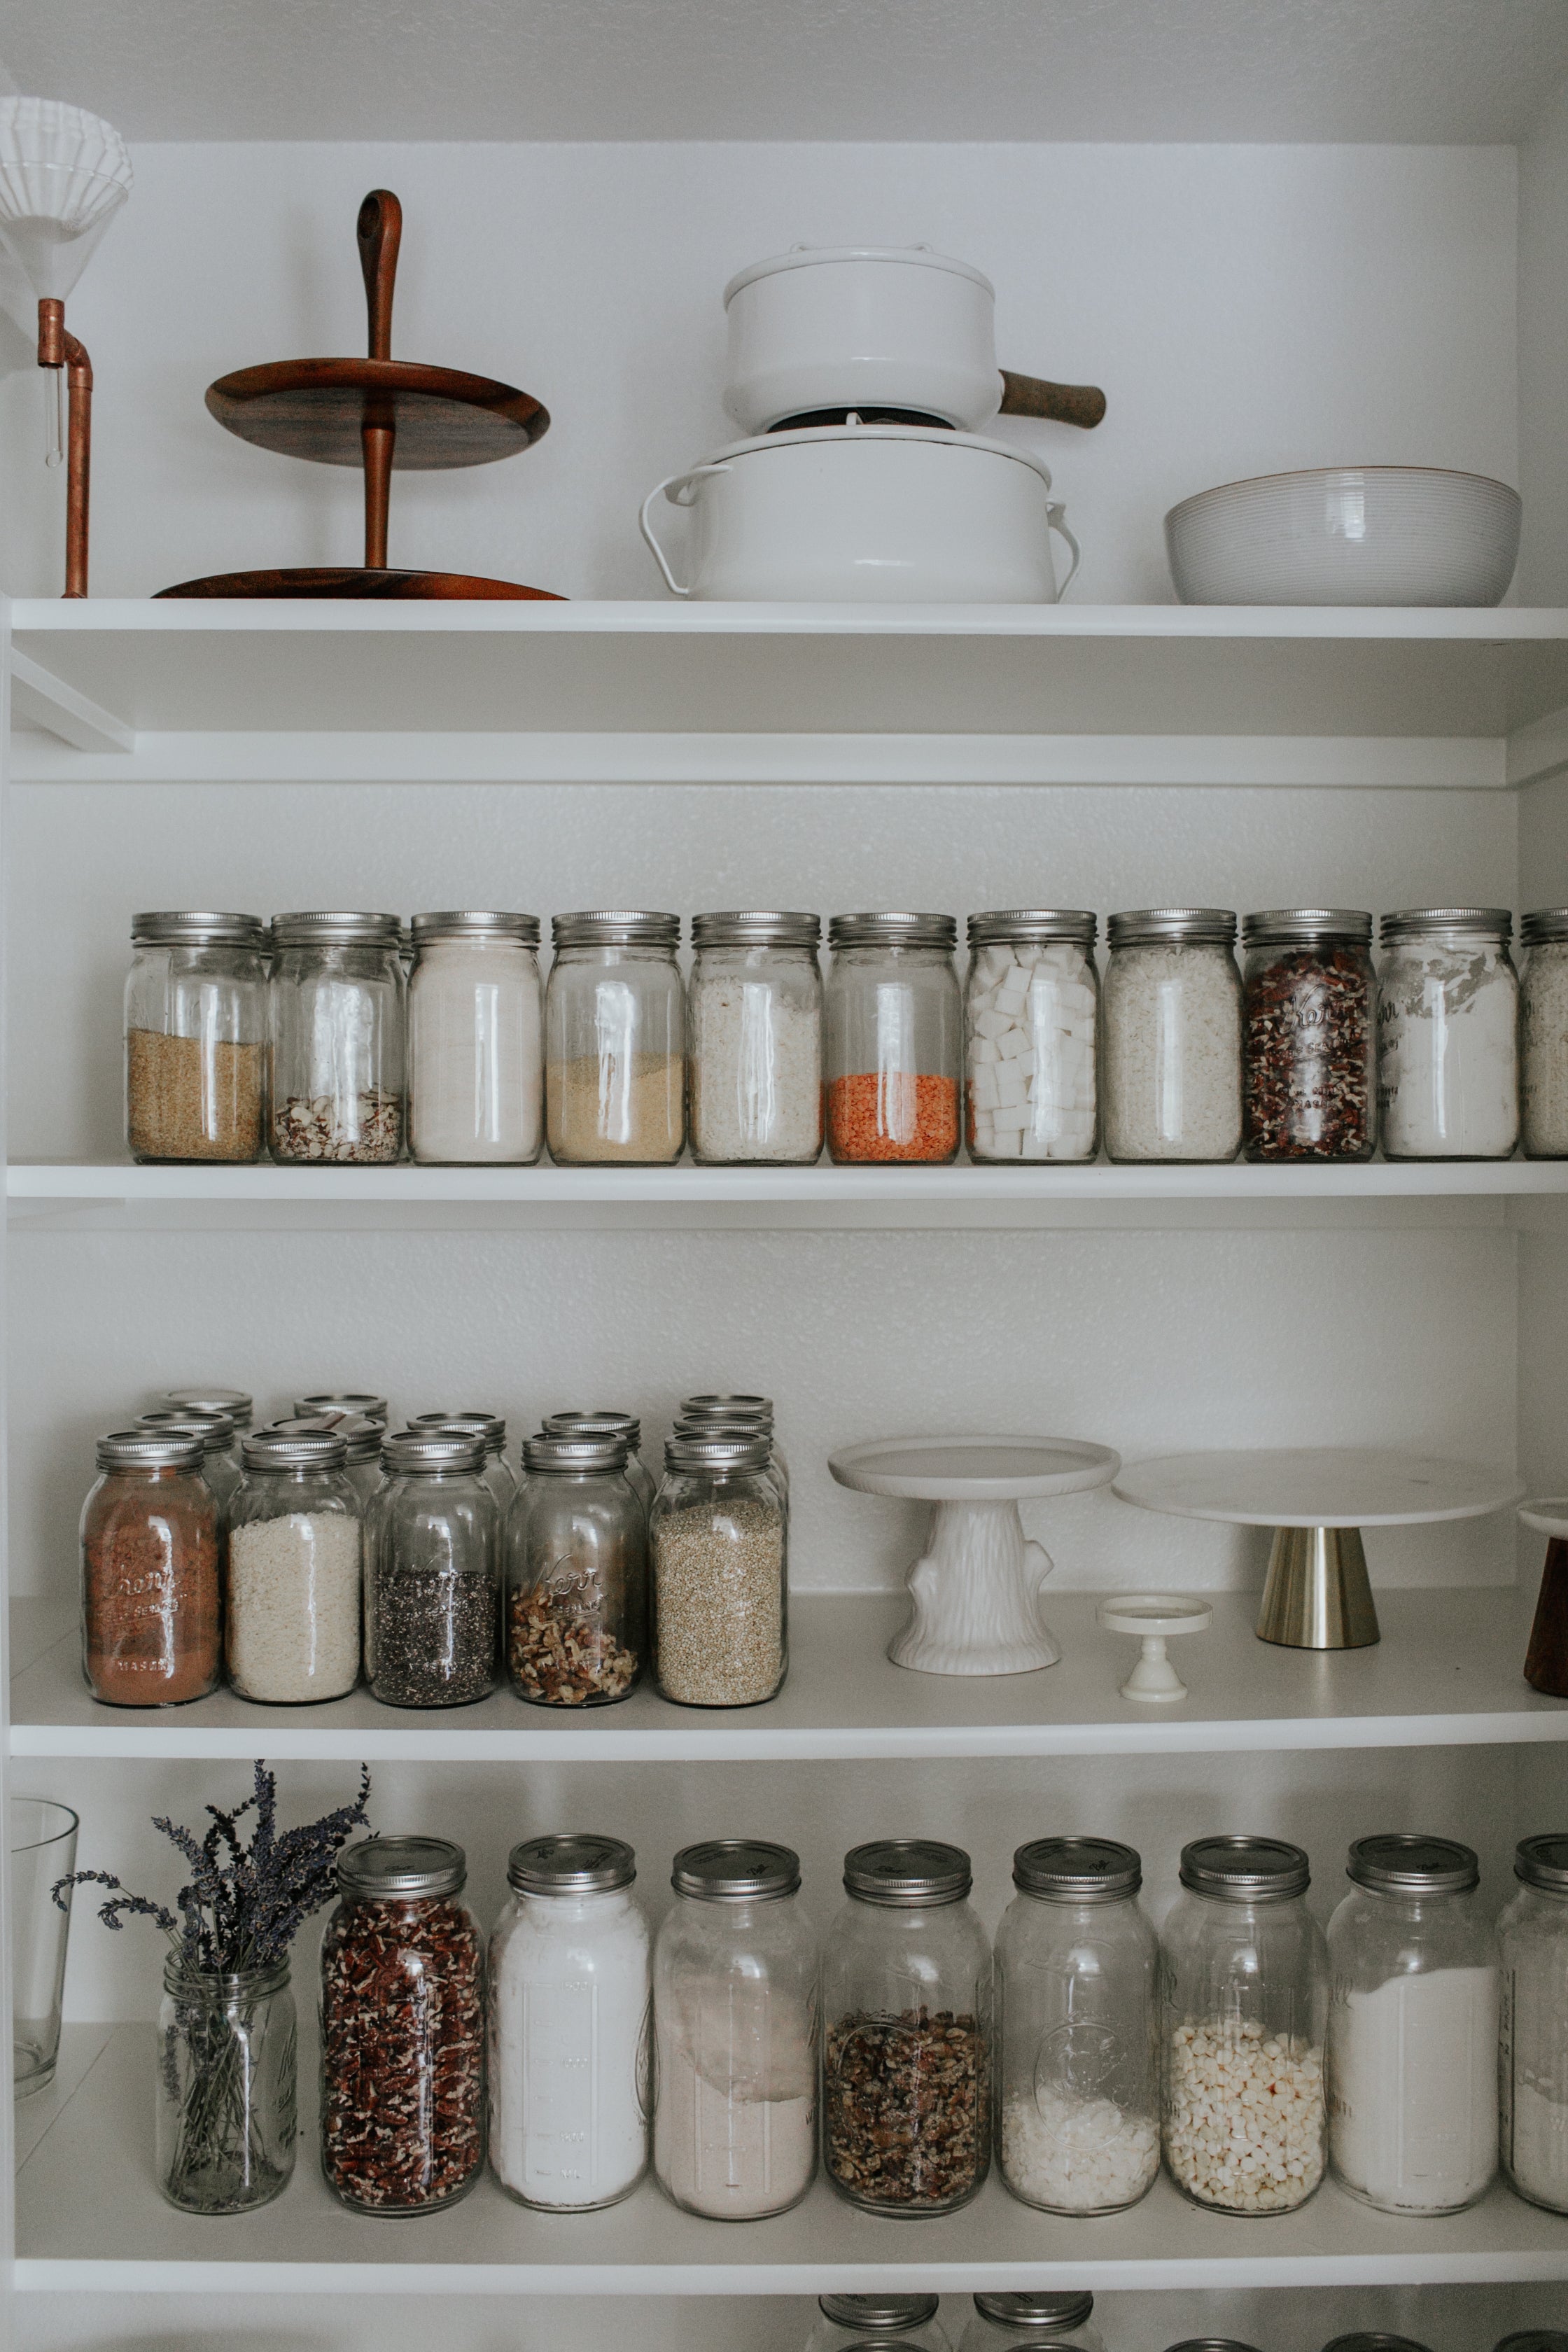 shelves with jars of spices